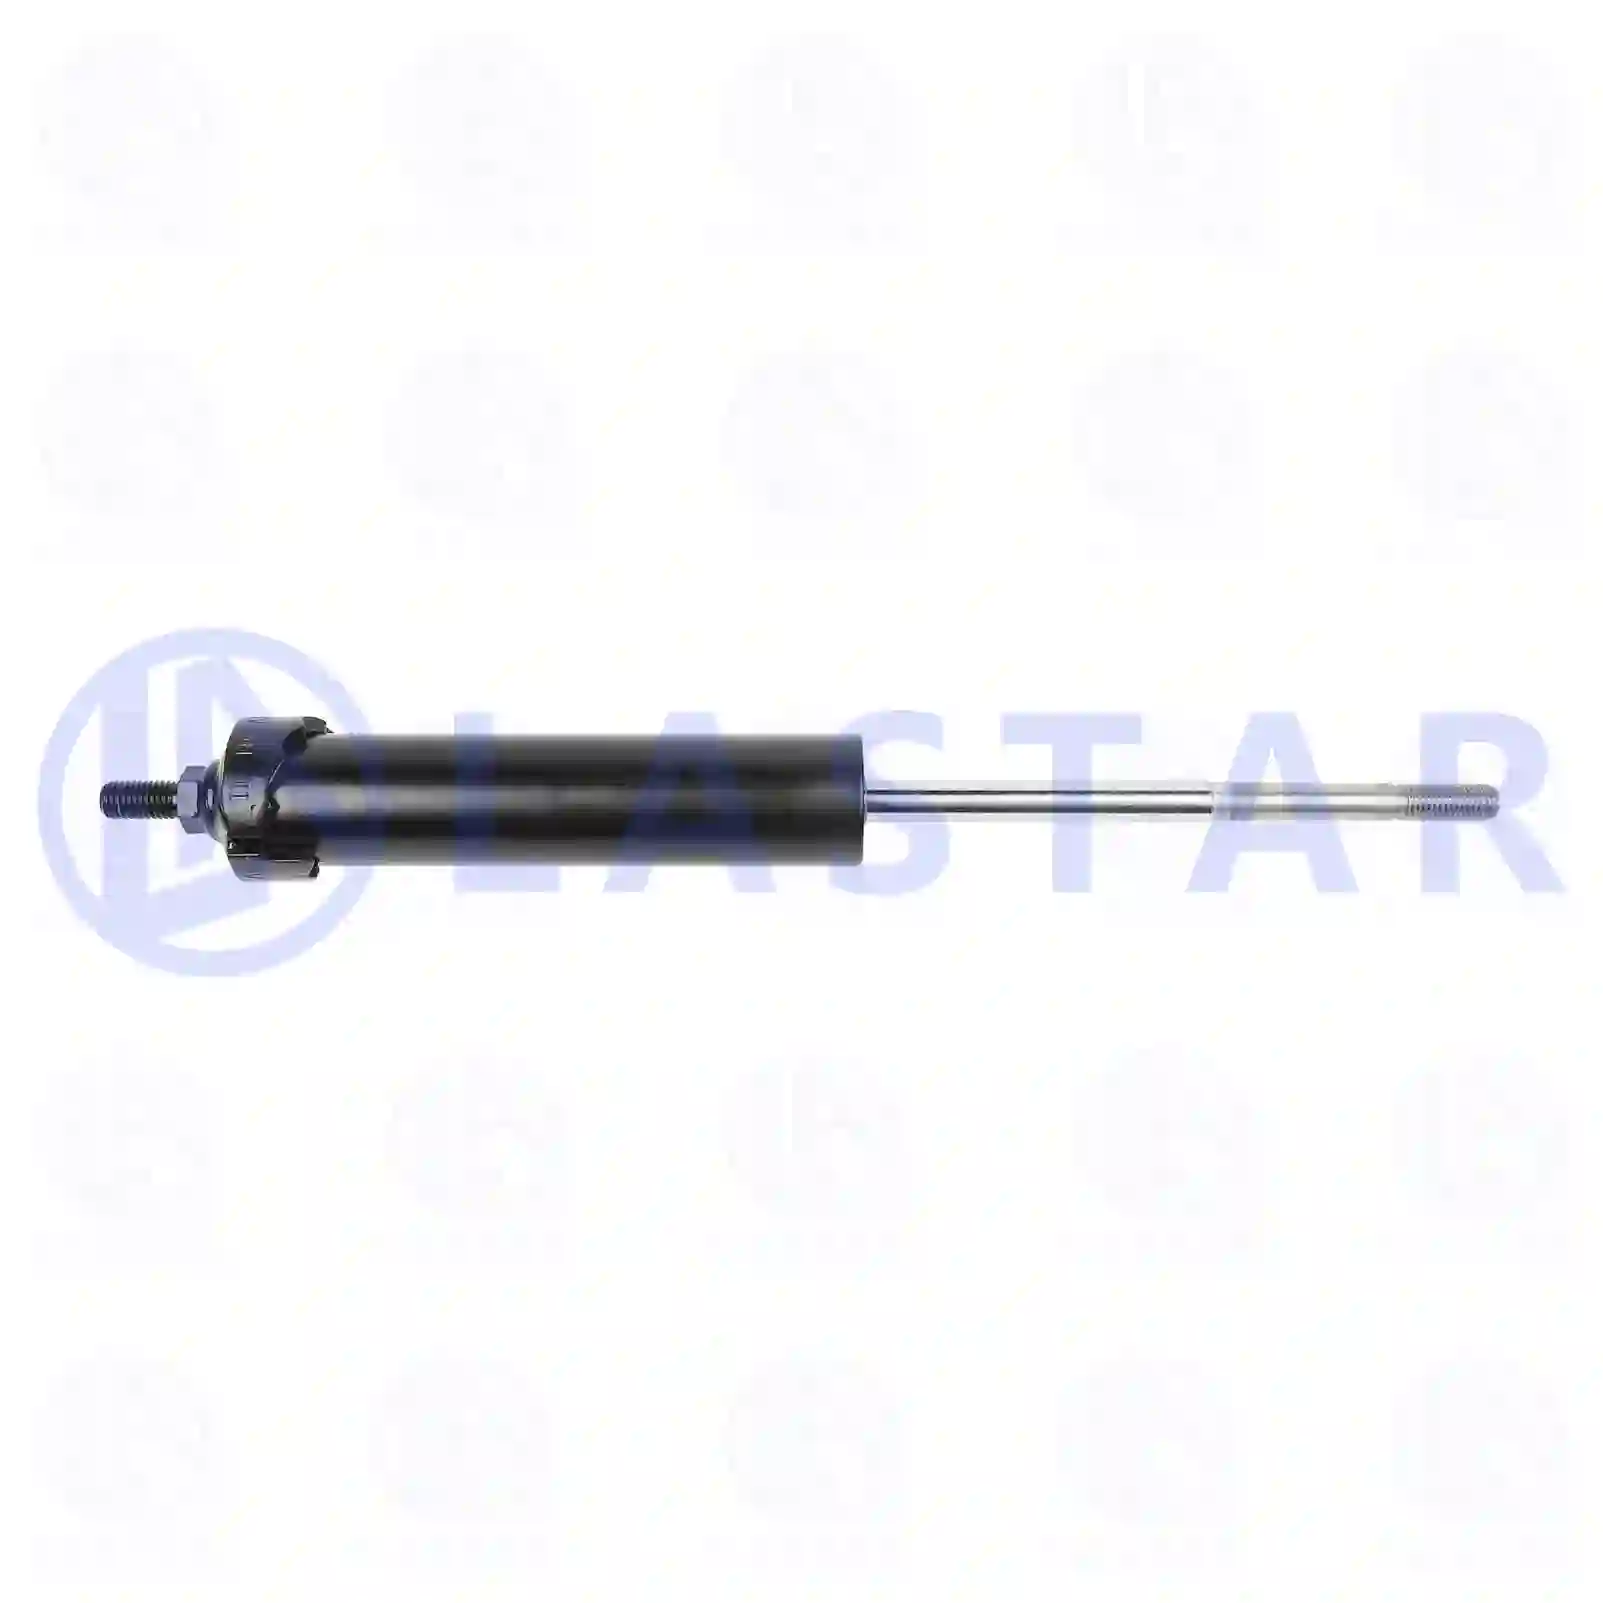 Cabin shock absorber, 77730153, 1943267, , , , ||  77730153 Lastar Spare Part | Truck Spare Parts, Auotomotive Spare Parts Cabin shock absorber, 77730153, 1943267, , , , ||  77730153 Lastar Spare Part | Truck Spare Parts, Auotomotive Spare Parts